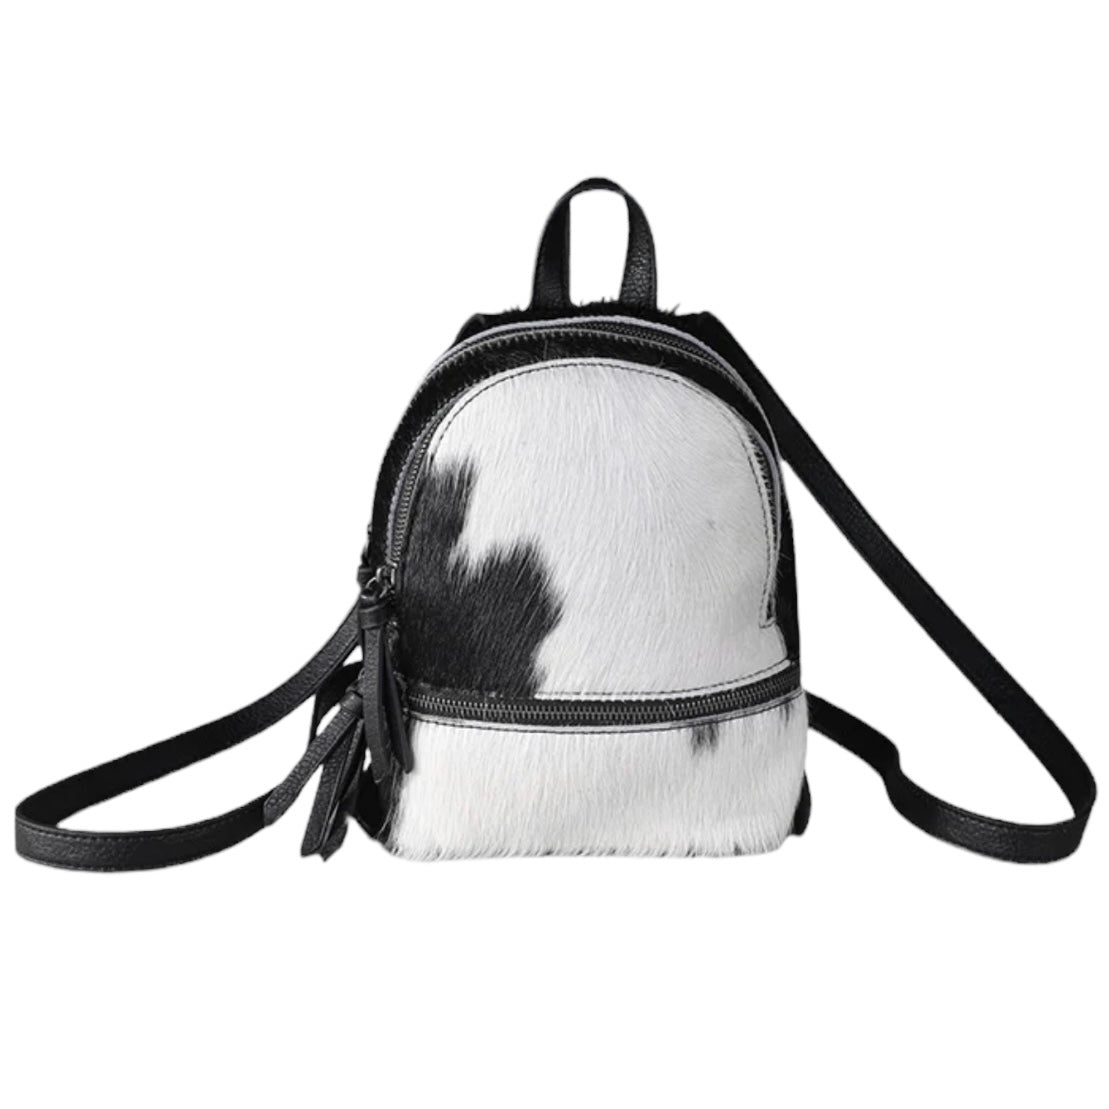 Trinity Ranch Hair-On Cowhide Collection Mini Backpack